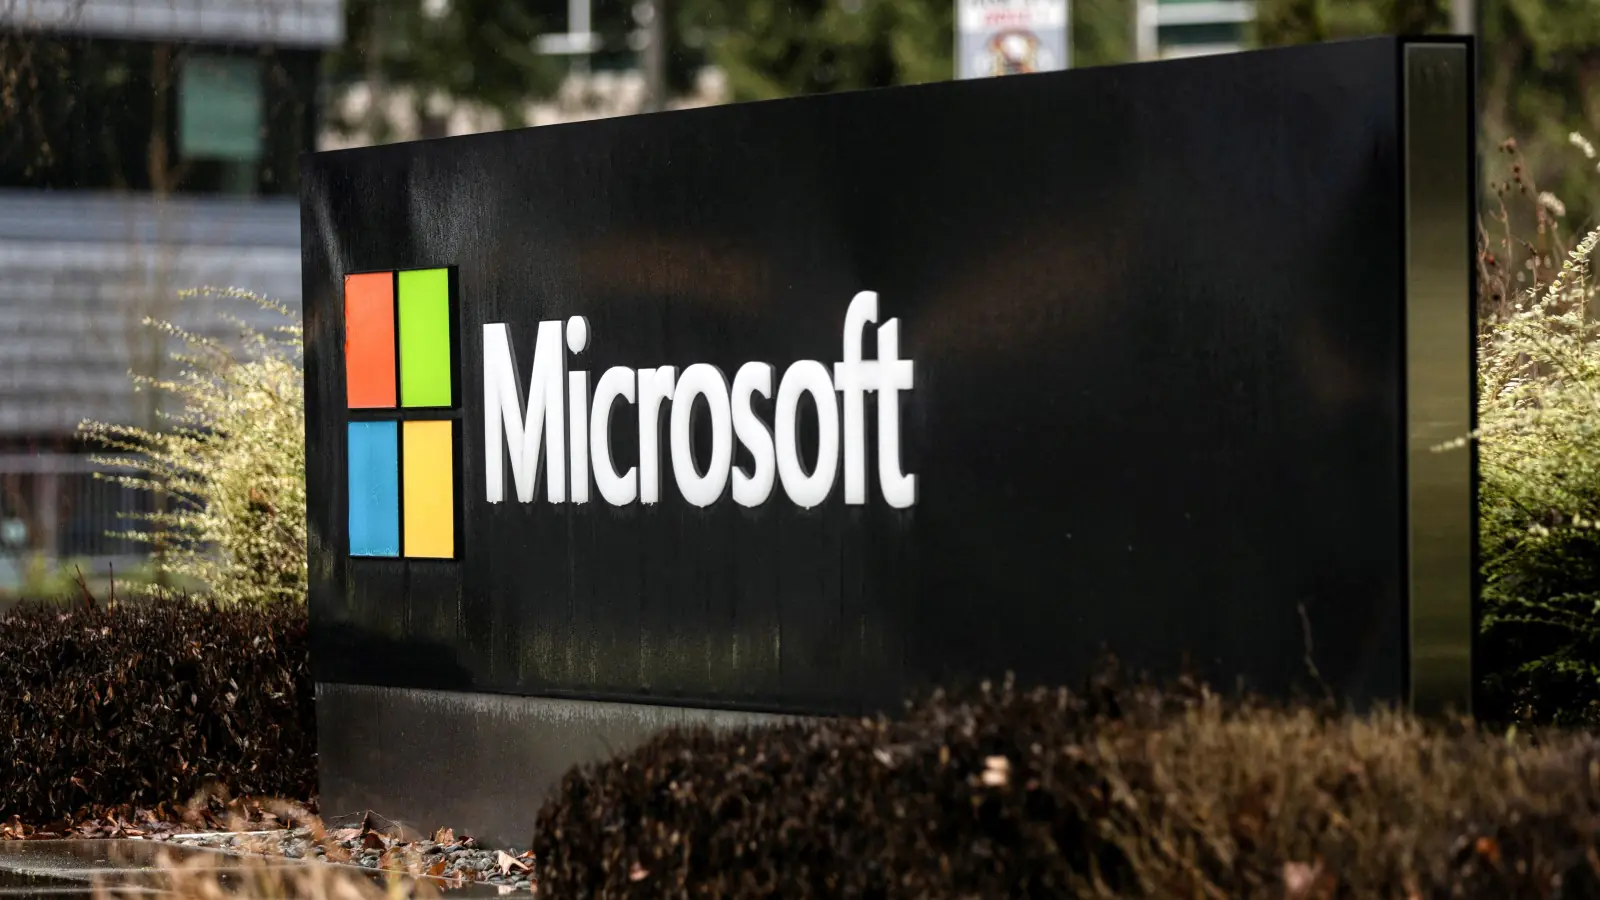 Microsoft will train 20 lakh Indians for jobs in the field of AI, new program announced